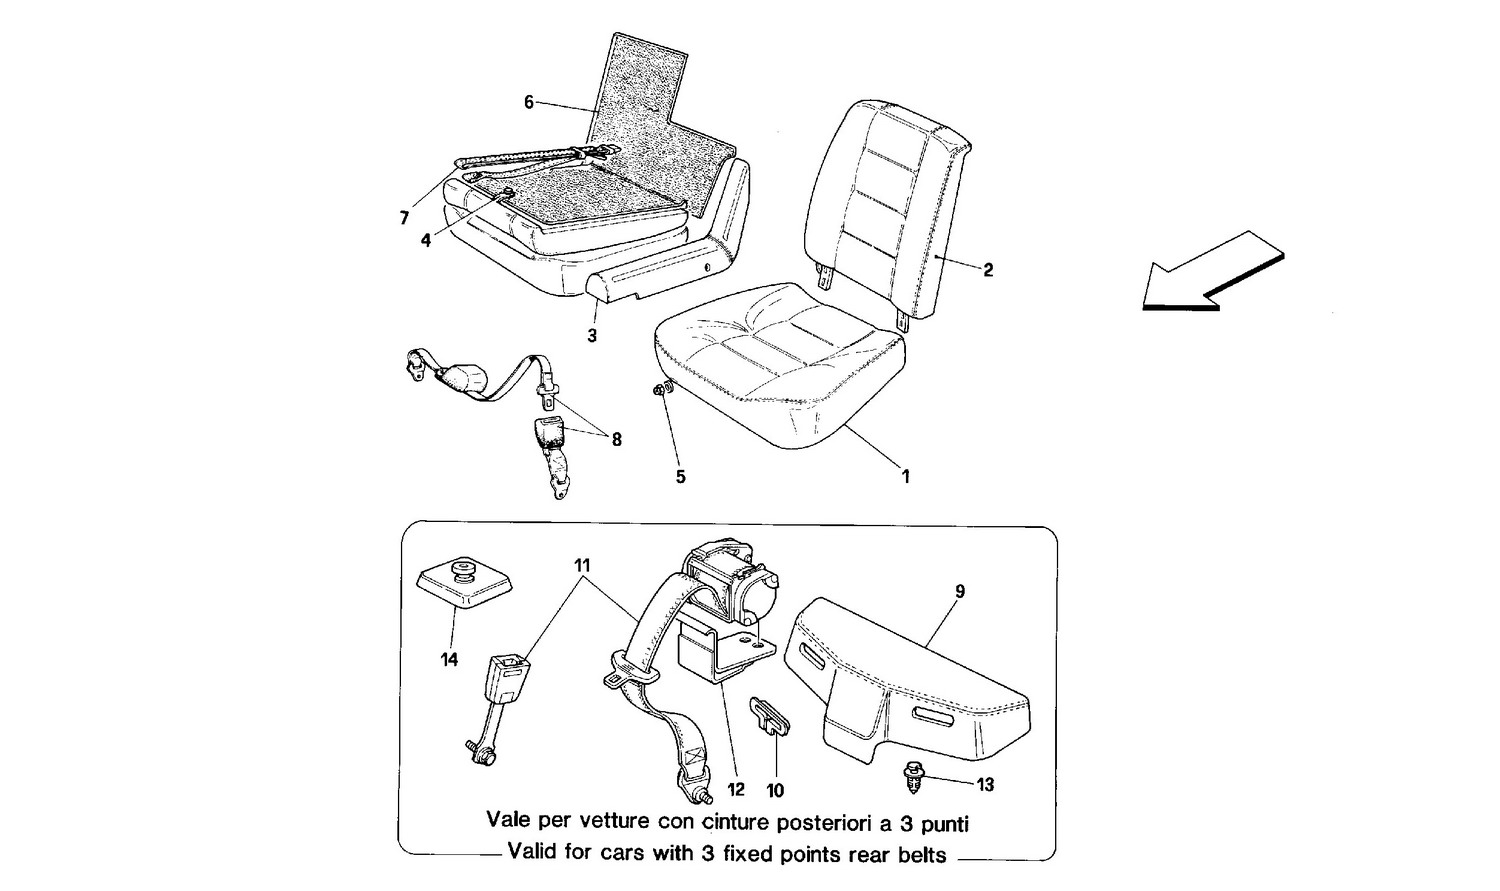 Schematic: Seats And Rear Safety Belts - Cabriolet-